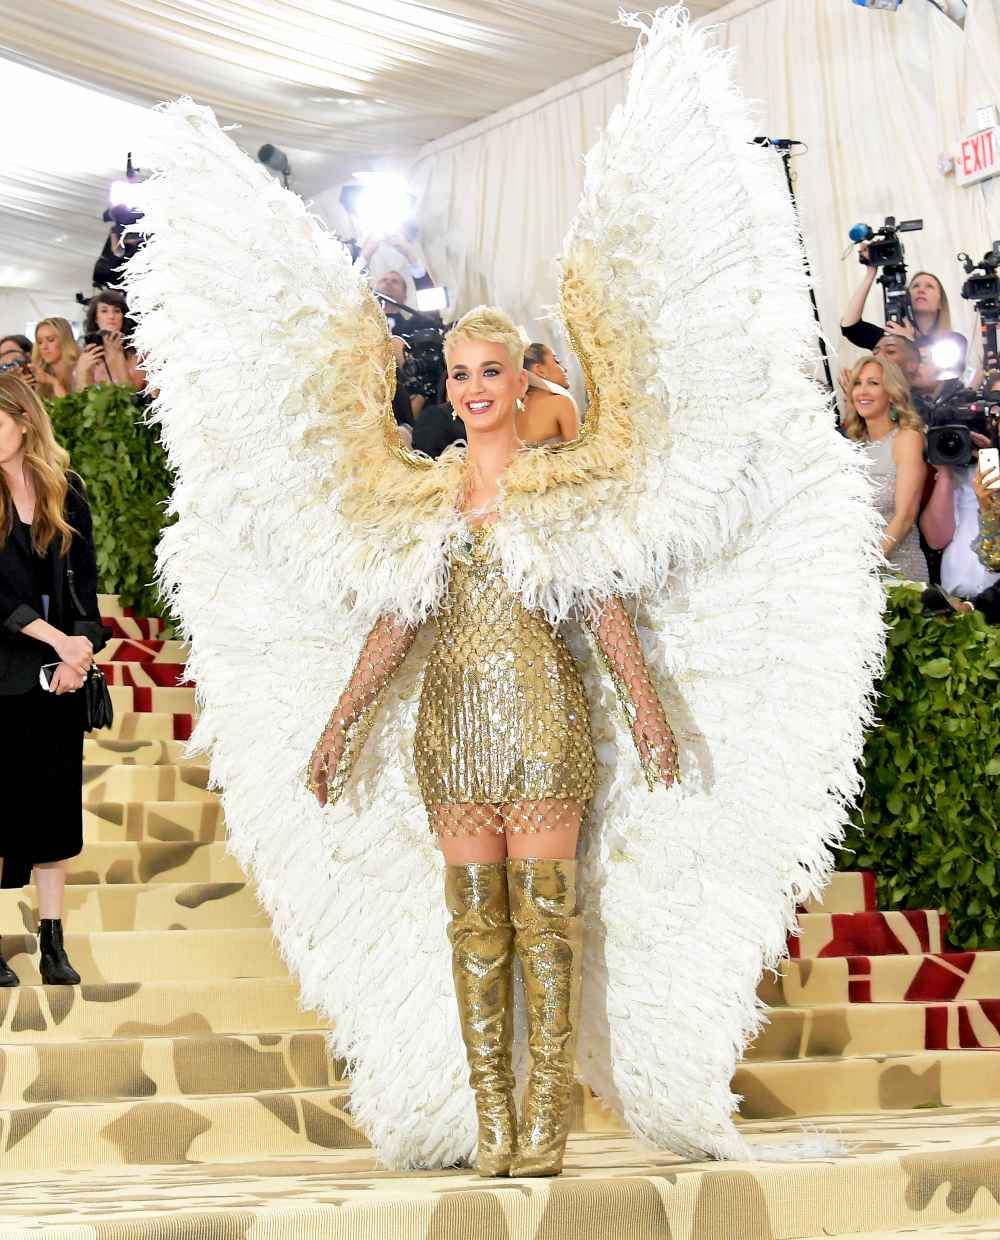 Katy Perry attends the Heavenly Bodies: Fashion & The Catholic Imagination Costume Institute Gala at The Metropolitan Museum of Art on May 7, 2018 in New York City.